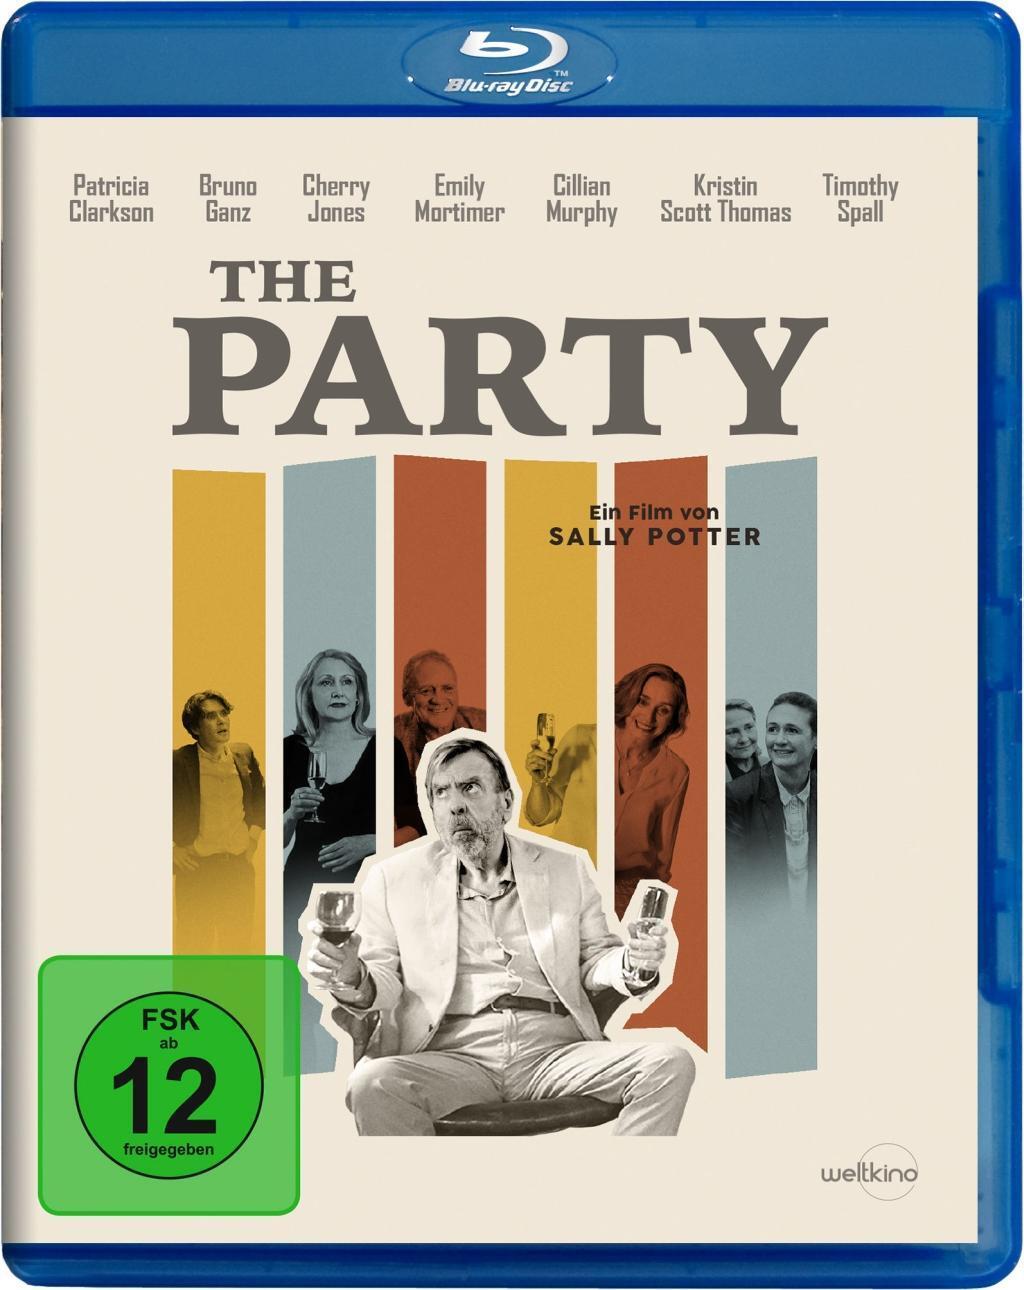 Cover: 889854521592 | The Party | Sally Potter | Blu-ray Disc | Deutsch | 2017 | Weltkino